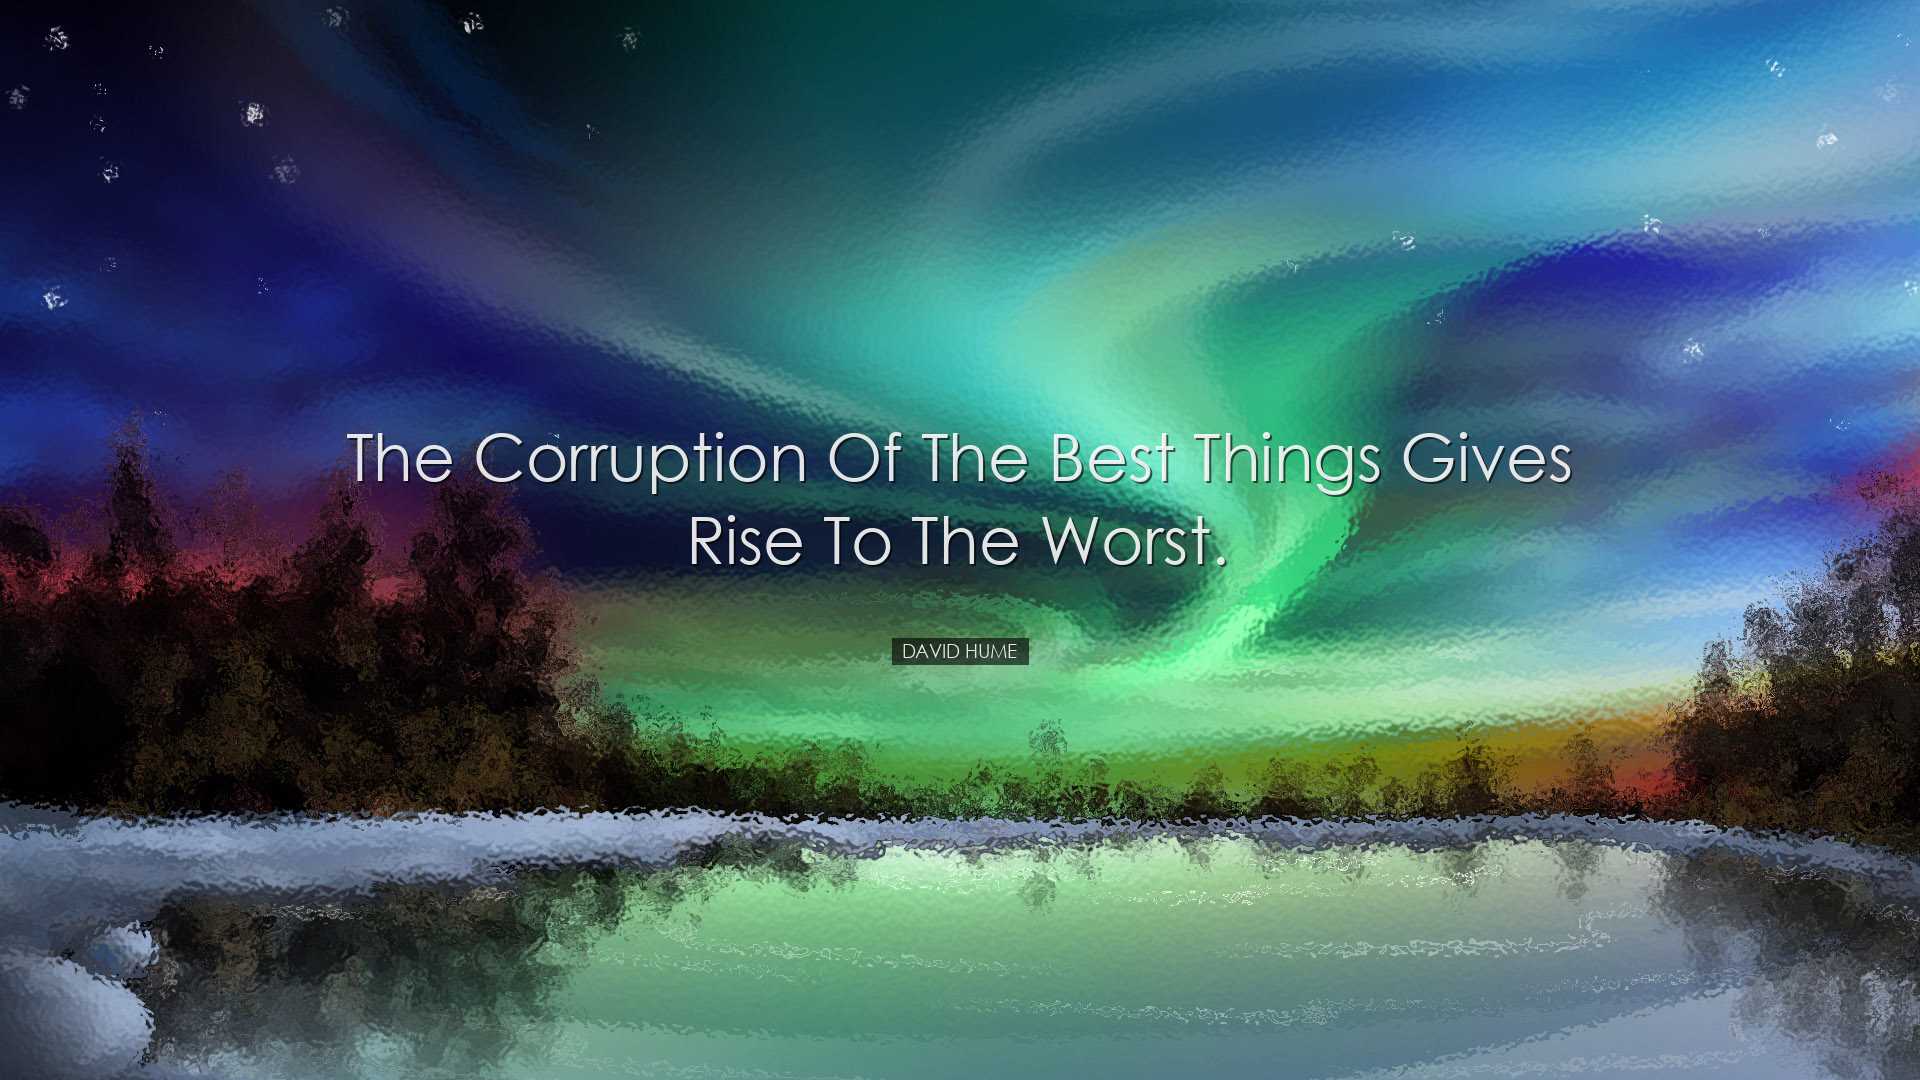 The corruption of the best things gives rise to the worst. - David